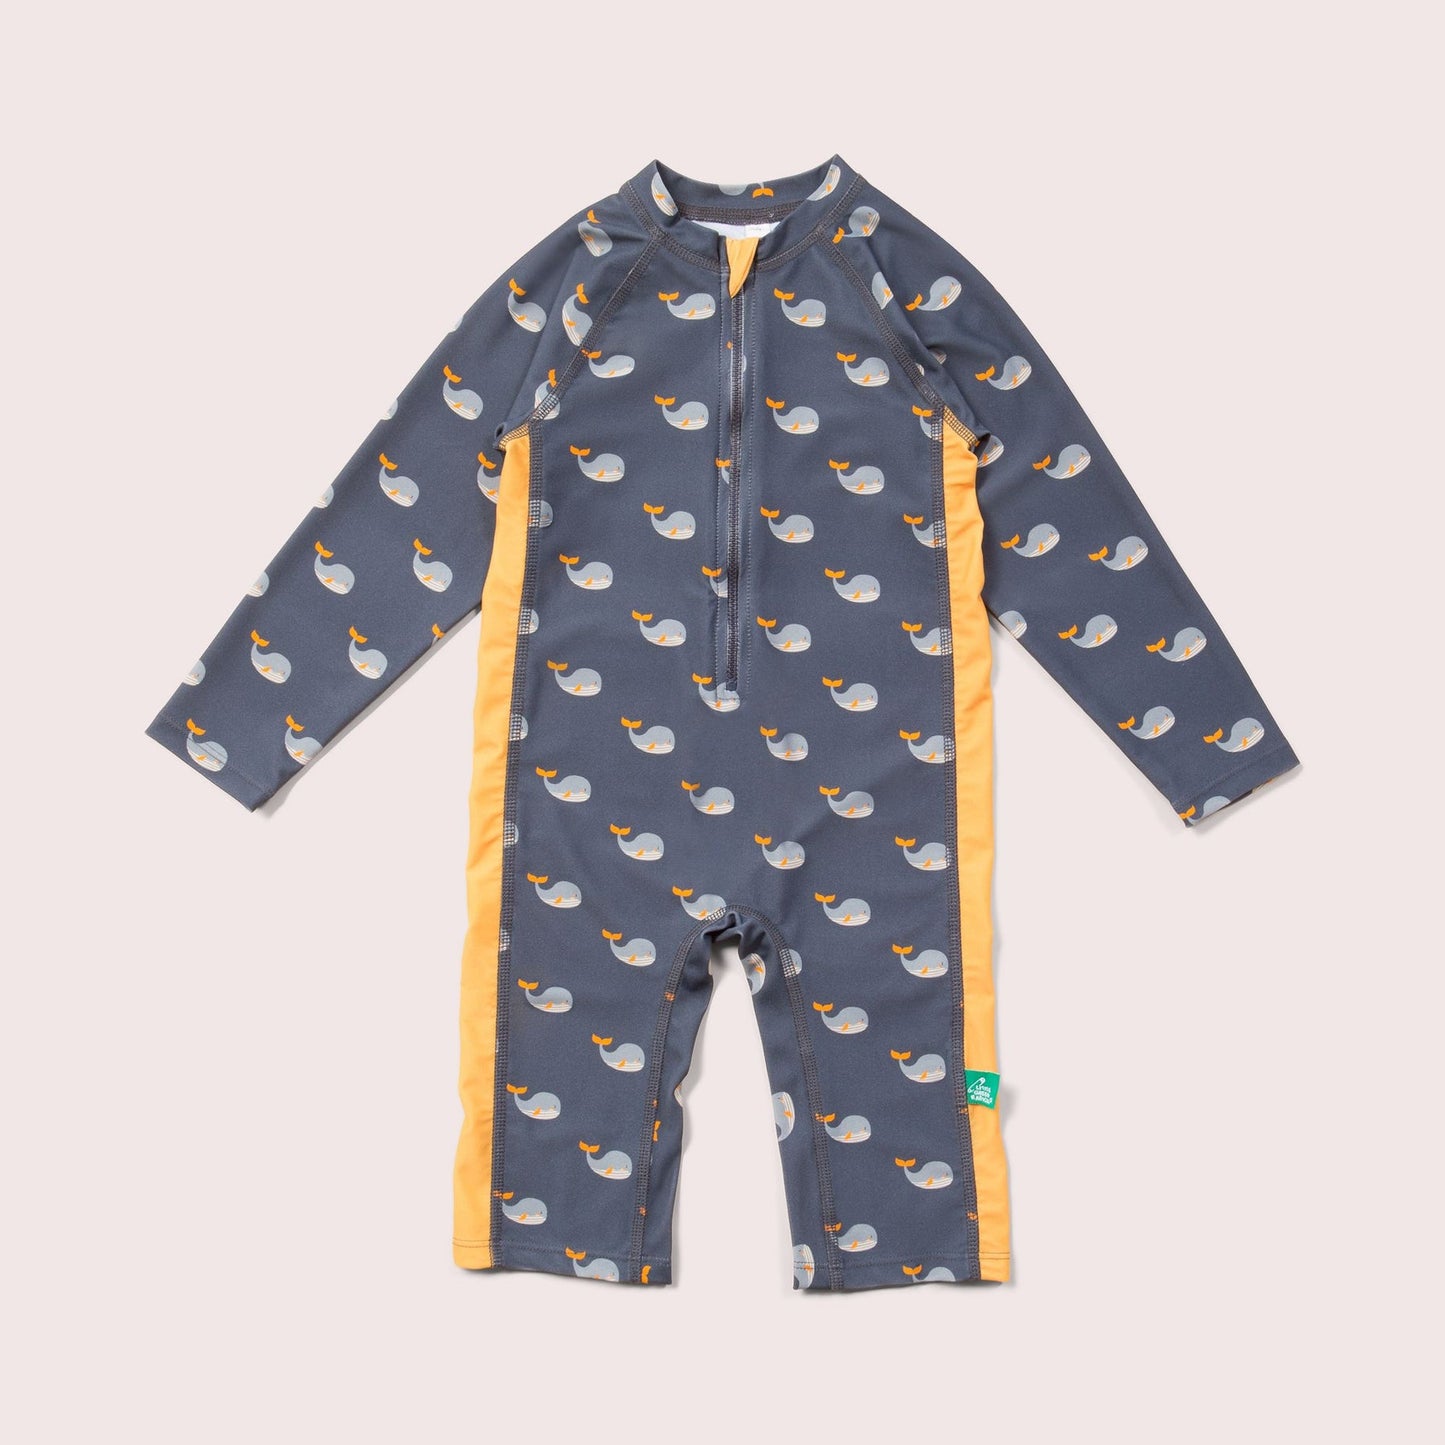 LGR Whale Song UVP 50+ Recycled Sunsafe Sunsuit